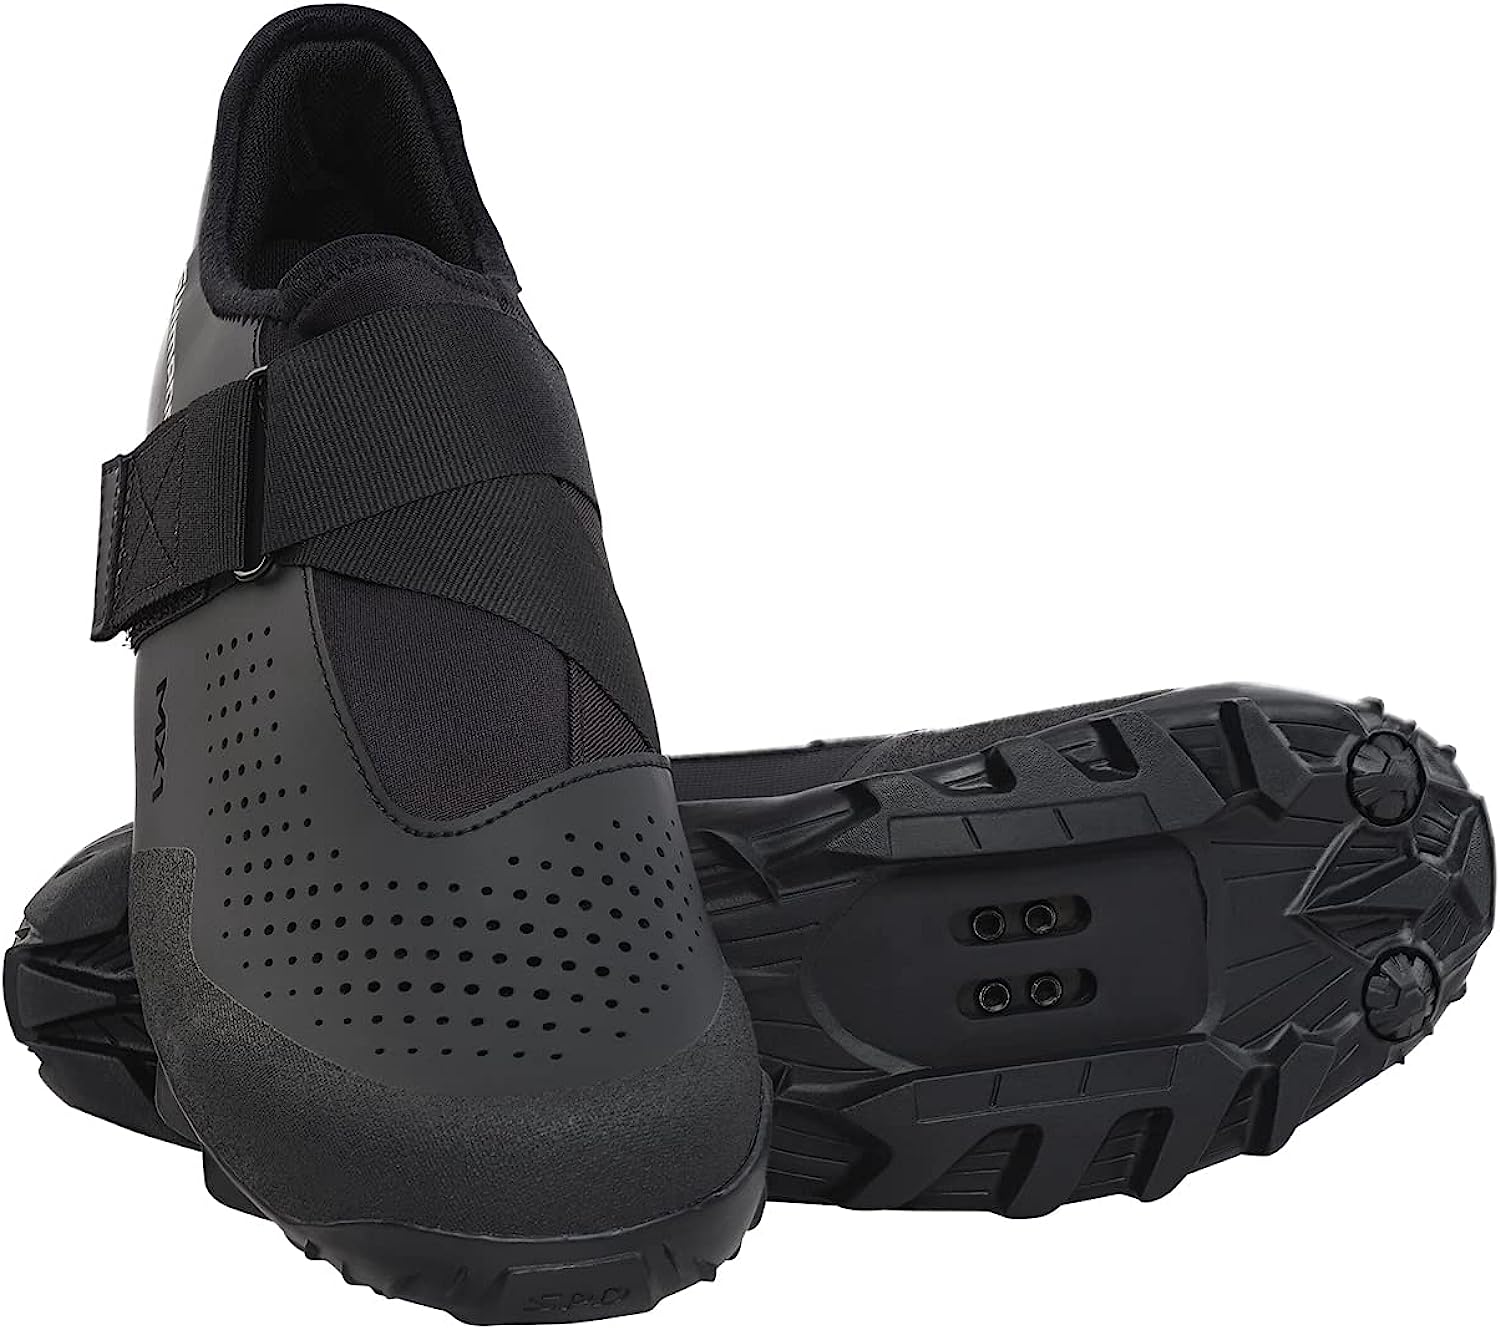 SHIMANO MX100 Unisex Off-Road Cycling Shoes, Multi-Use [...]